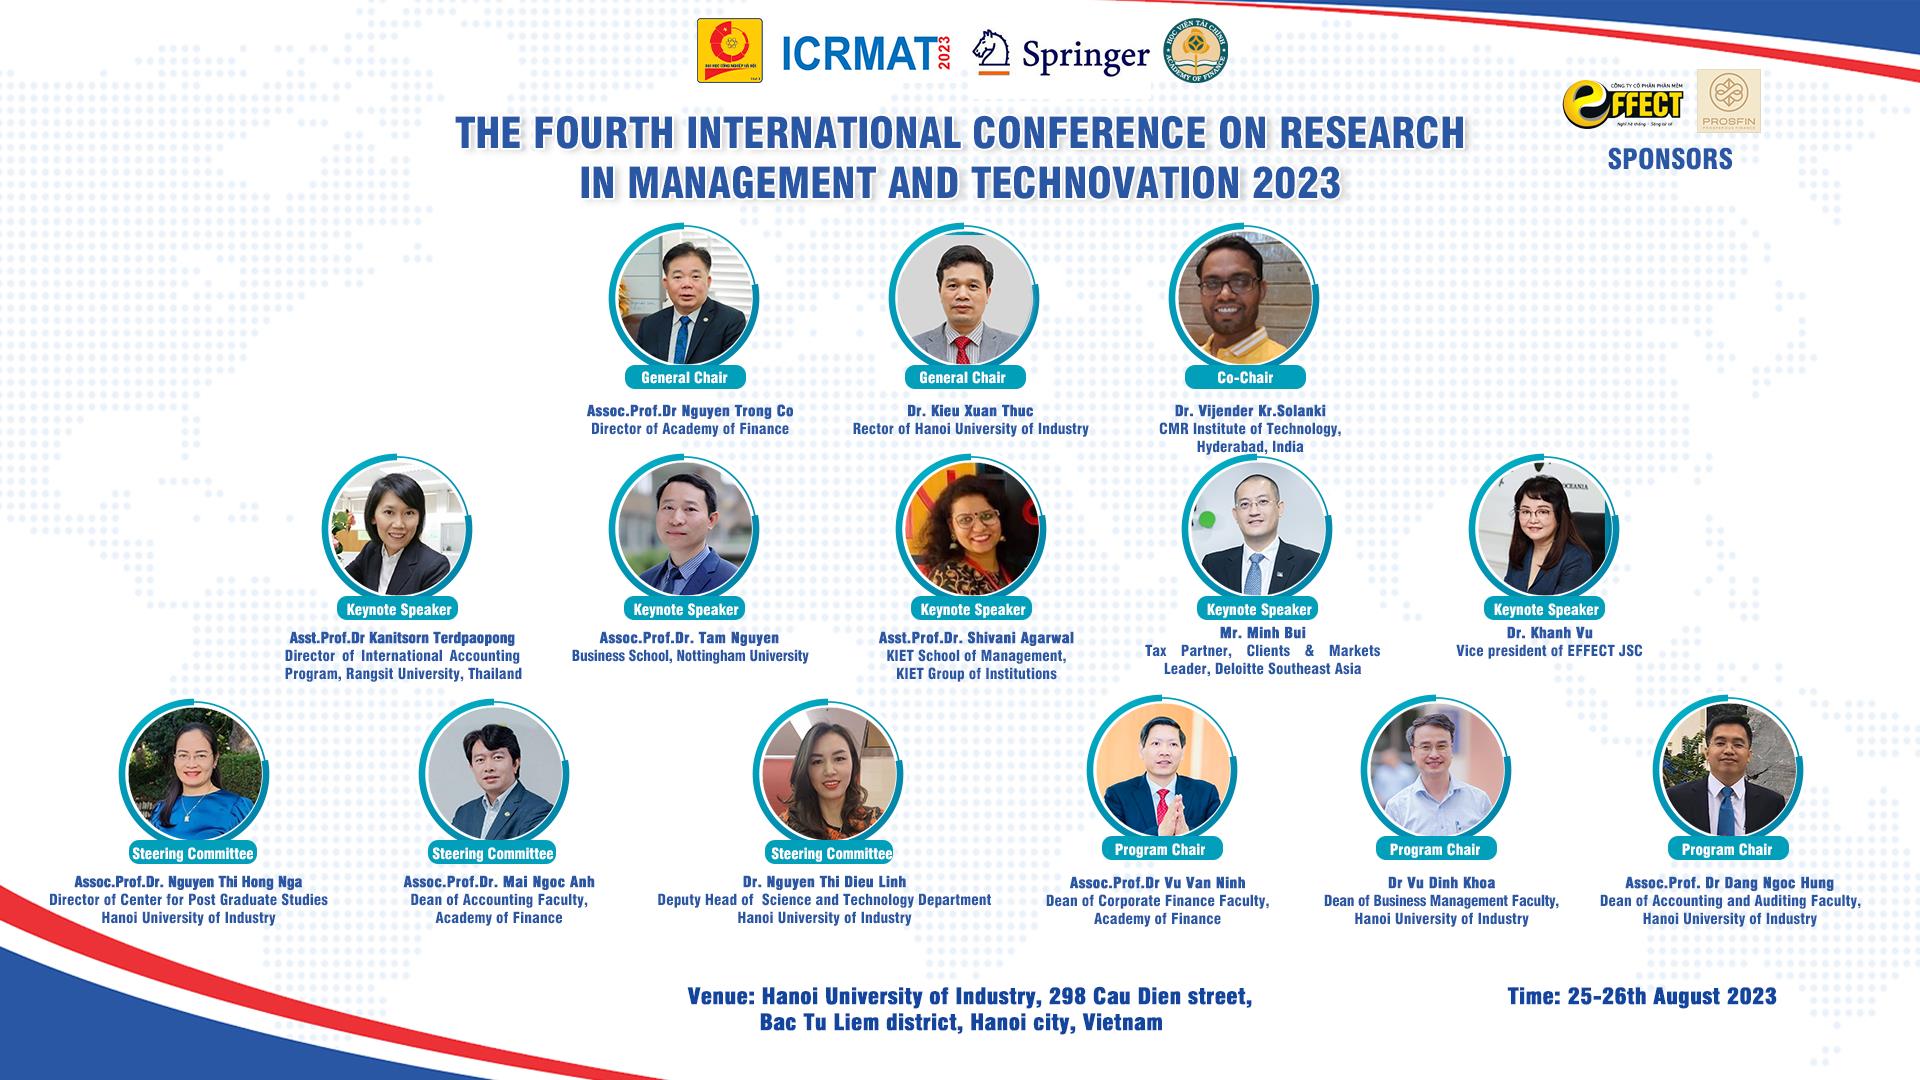 ICRMAT 2023: Promoting innovative technology solutions